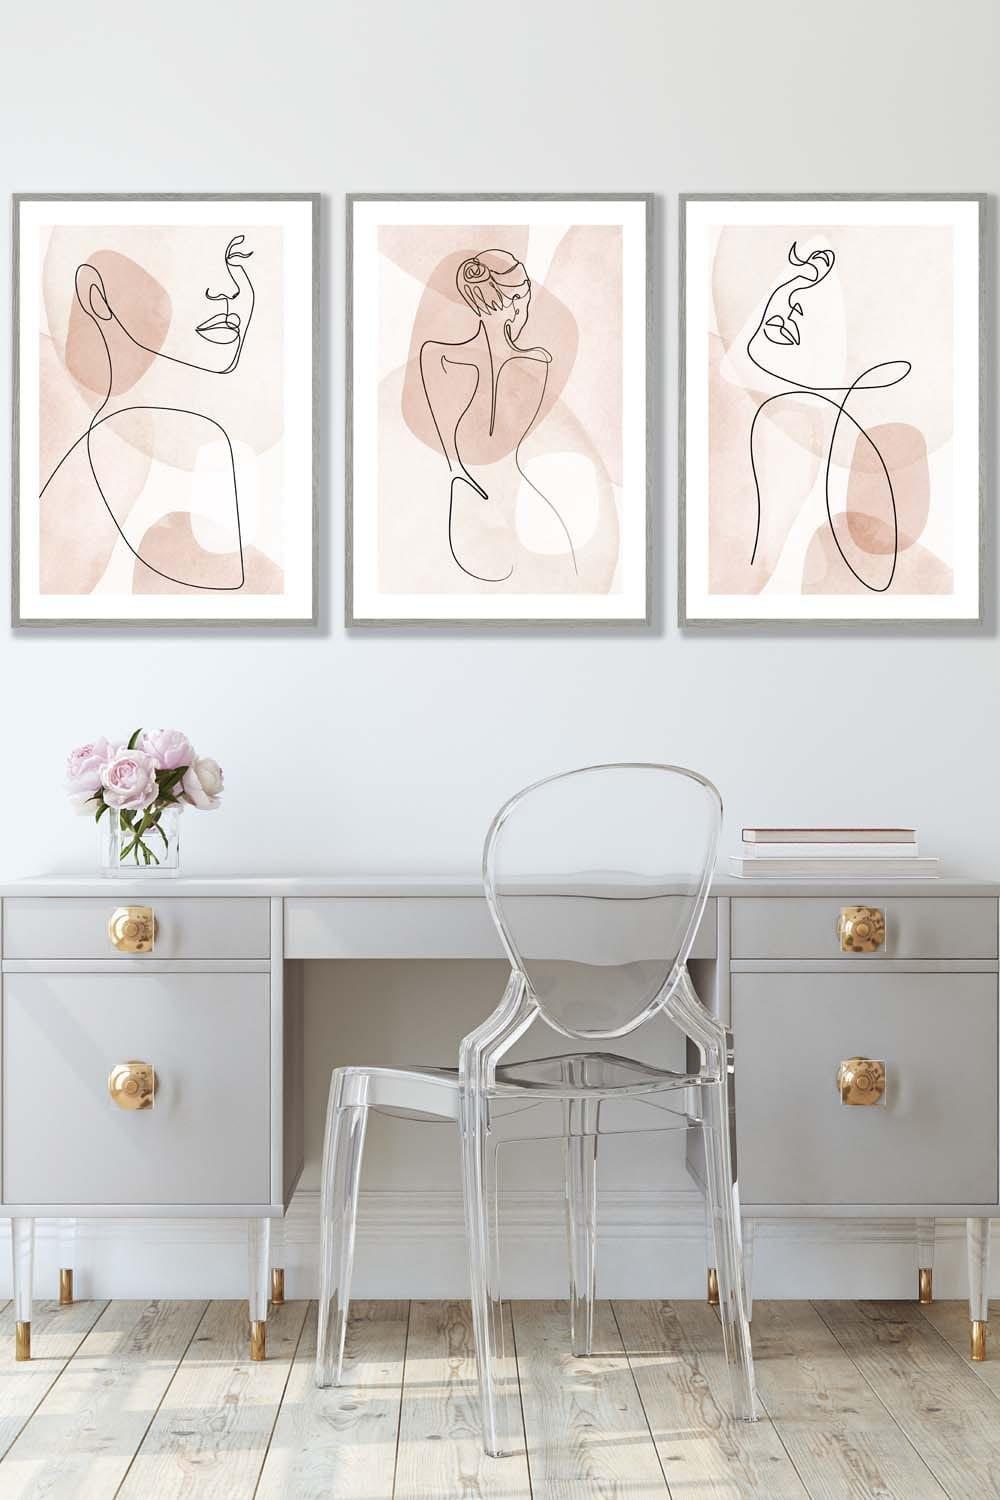 Set of 3 Light Grey Framed Coral Pink Abstract Line Art Female Wall Art